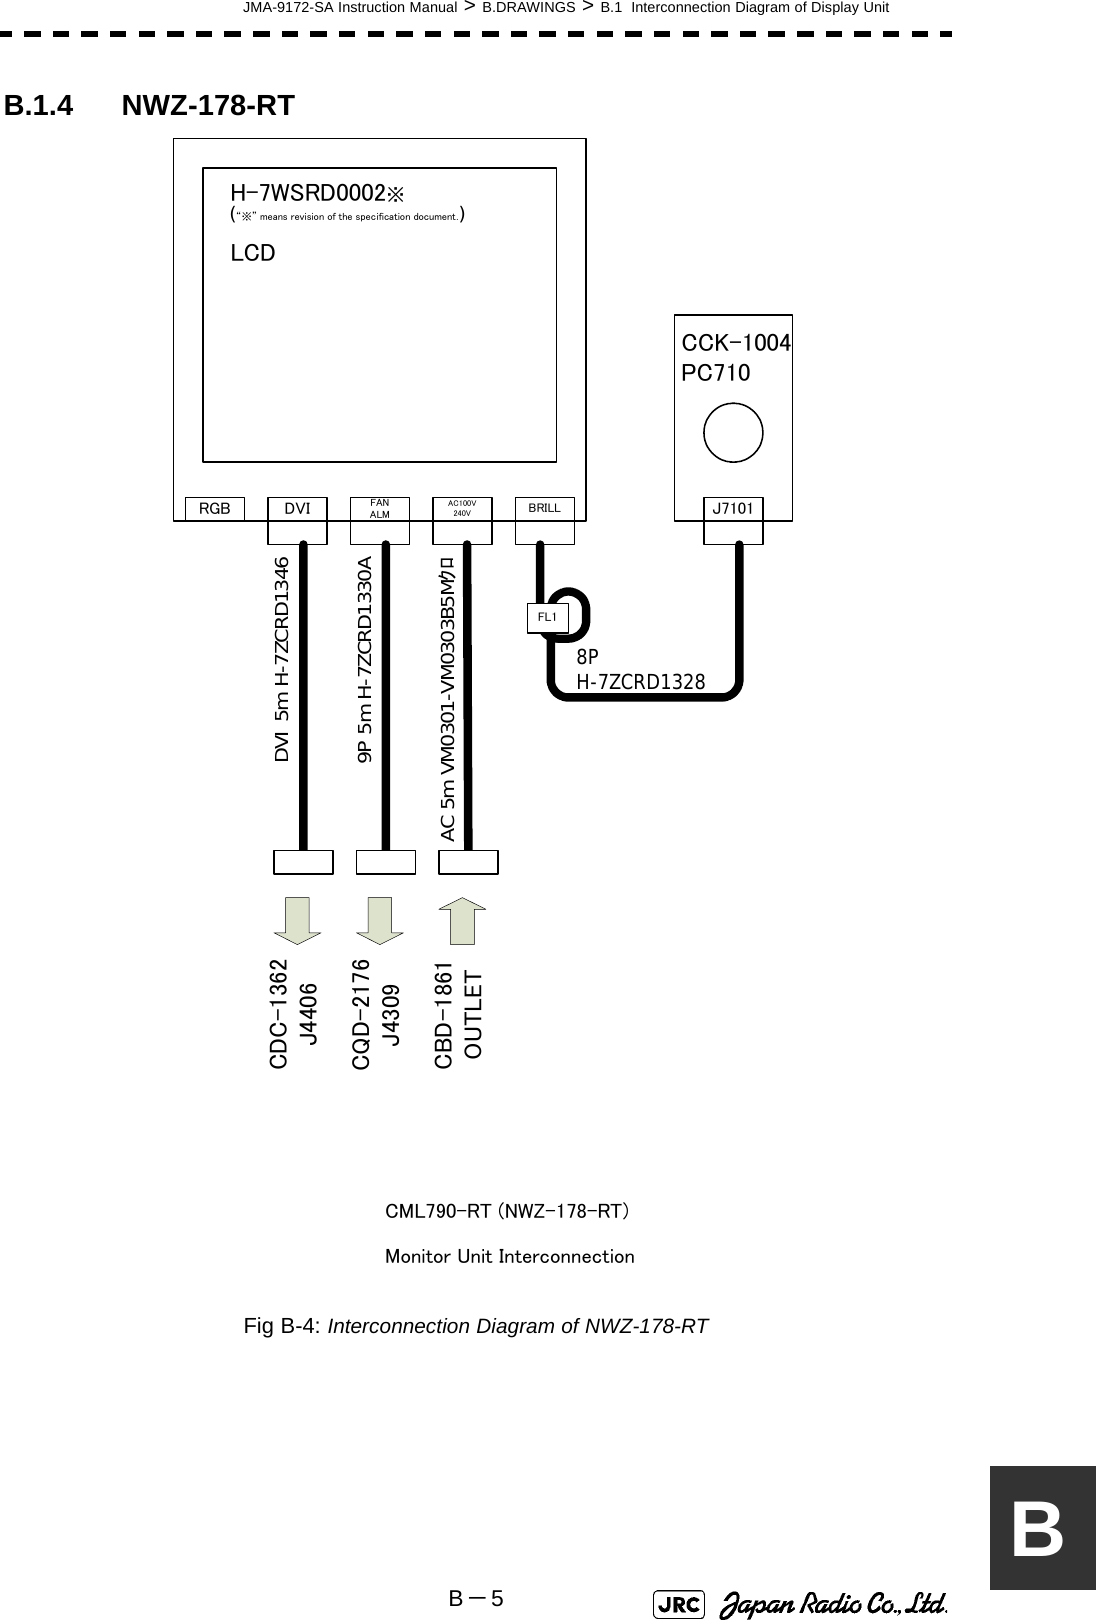 JMA-9172-SA Instruction Manual &gt; B.DRAWINGS &gt; B.1  Interconnection Diagram of Display UnitB－5BB.1.4 NWZ-178-RTFig B-4: Interconnection Diagram of NWZ-178-RT J7101BRILLAC100V240VFANALMDVIRGBCCK-1004PC710H-7WSRD0002※LCD8PH-7ZCRD1328FL19P 5m H-7ZCRD1330ADVI 5m H-7ZCRD1346AC 5m VM0301-VM0303B5MｸﾛCDC-1362J4406CQD-2176J4309CBD-1861OUTLET(“※” means revision of the specification document.)CML790-RT (NWZ-178-RT)Monitor Unit Interconnection